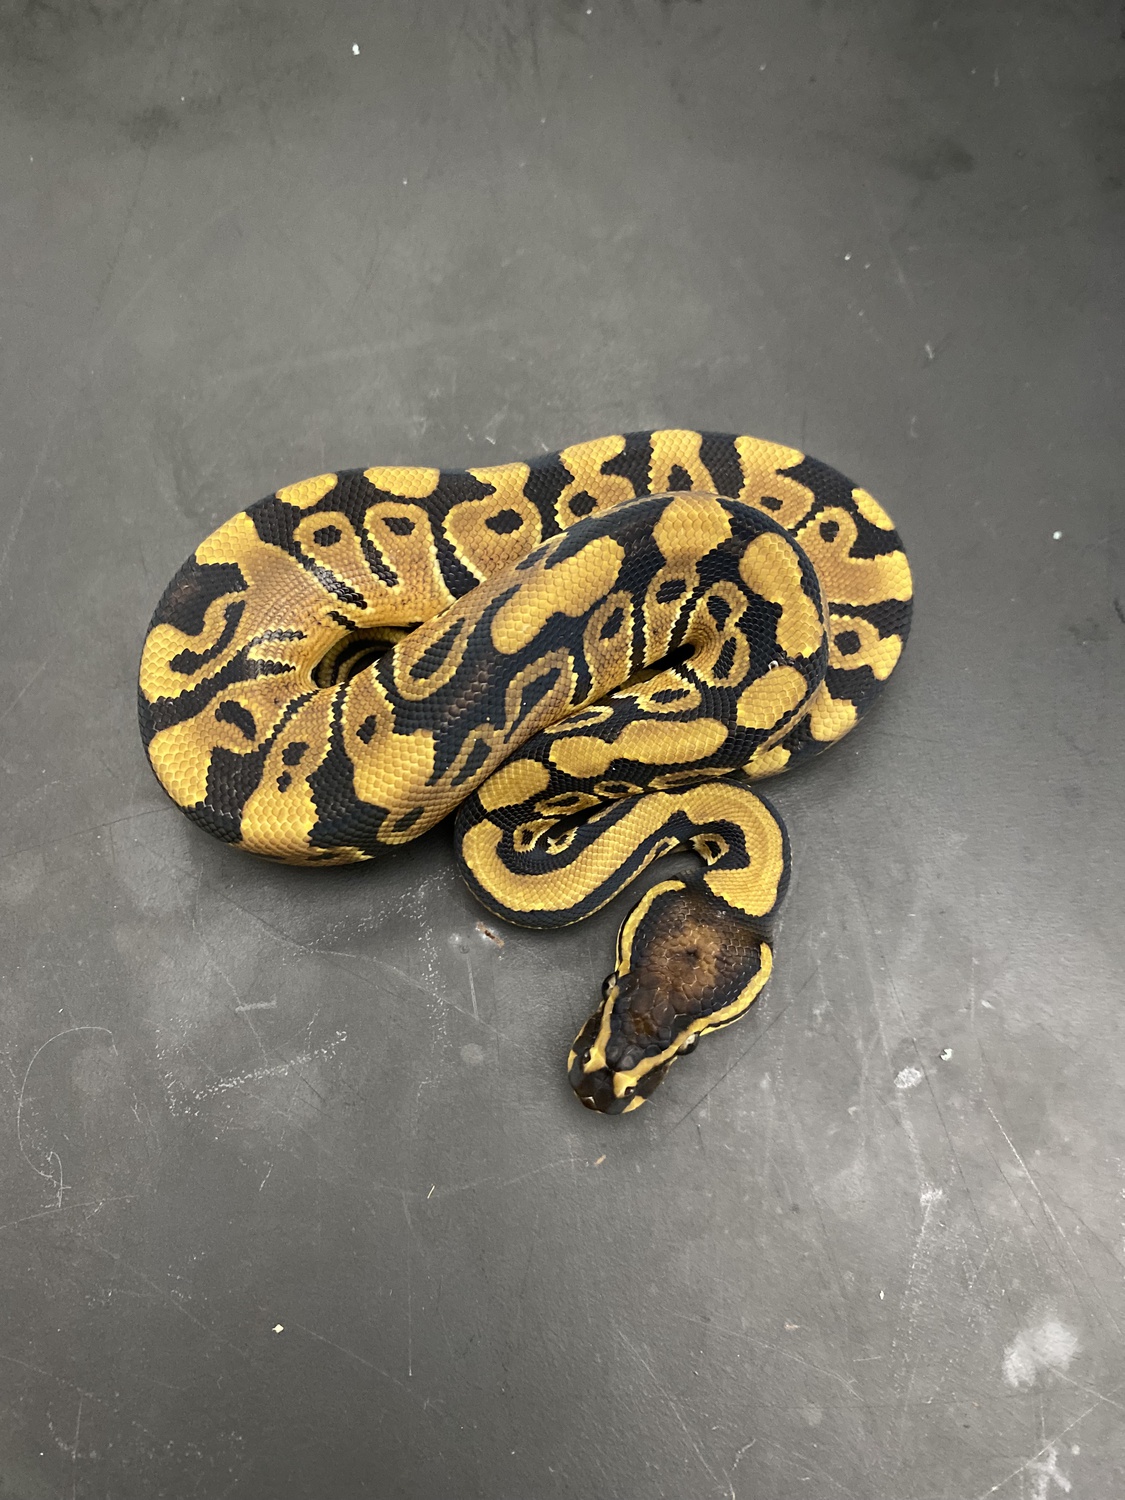 Epic Het Clown Ball Python by Saunders Snakes